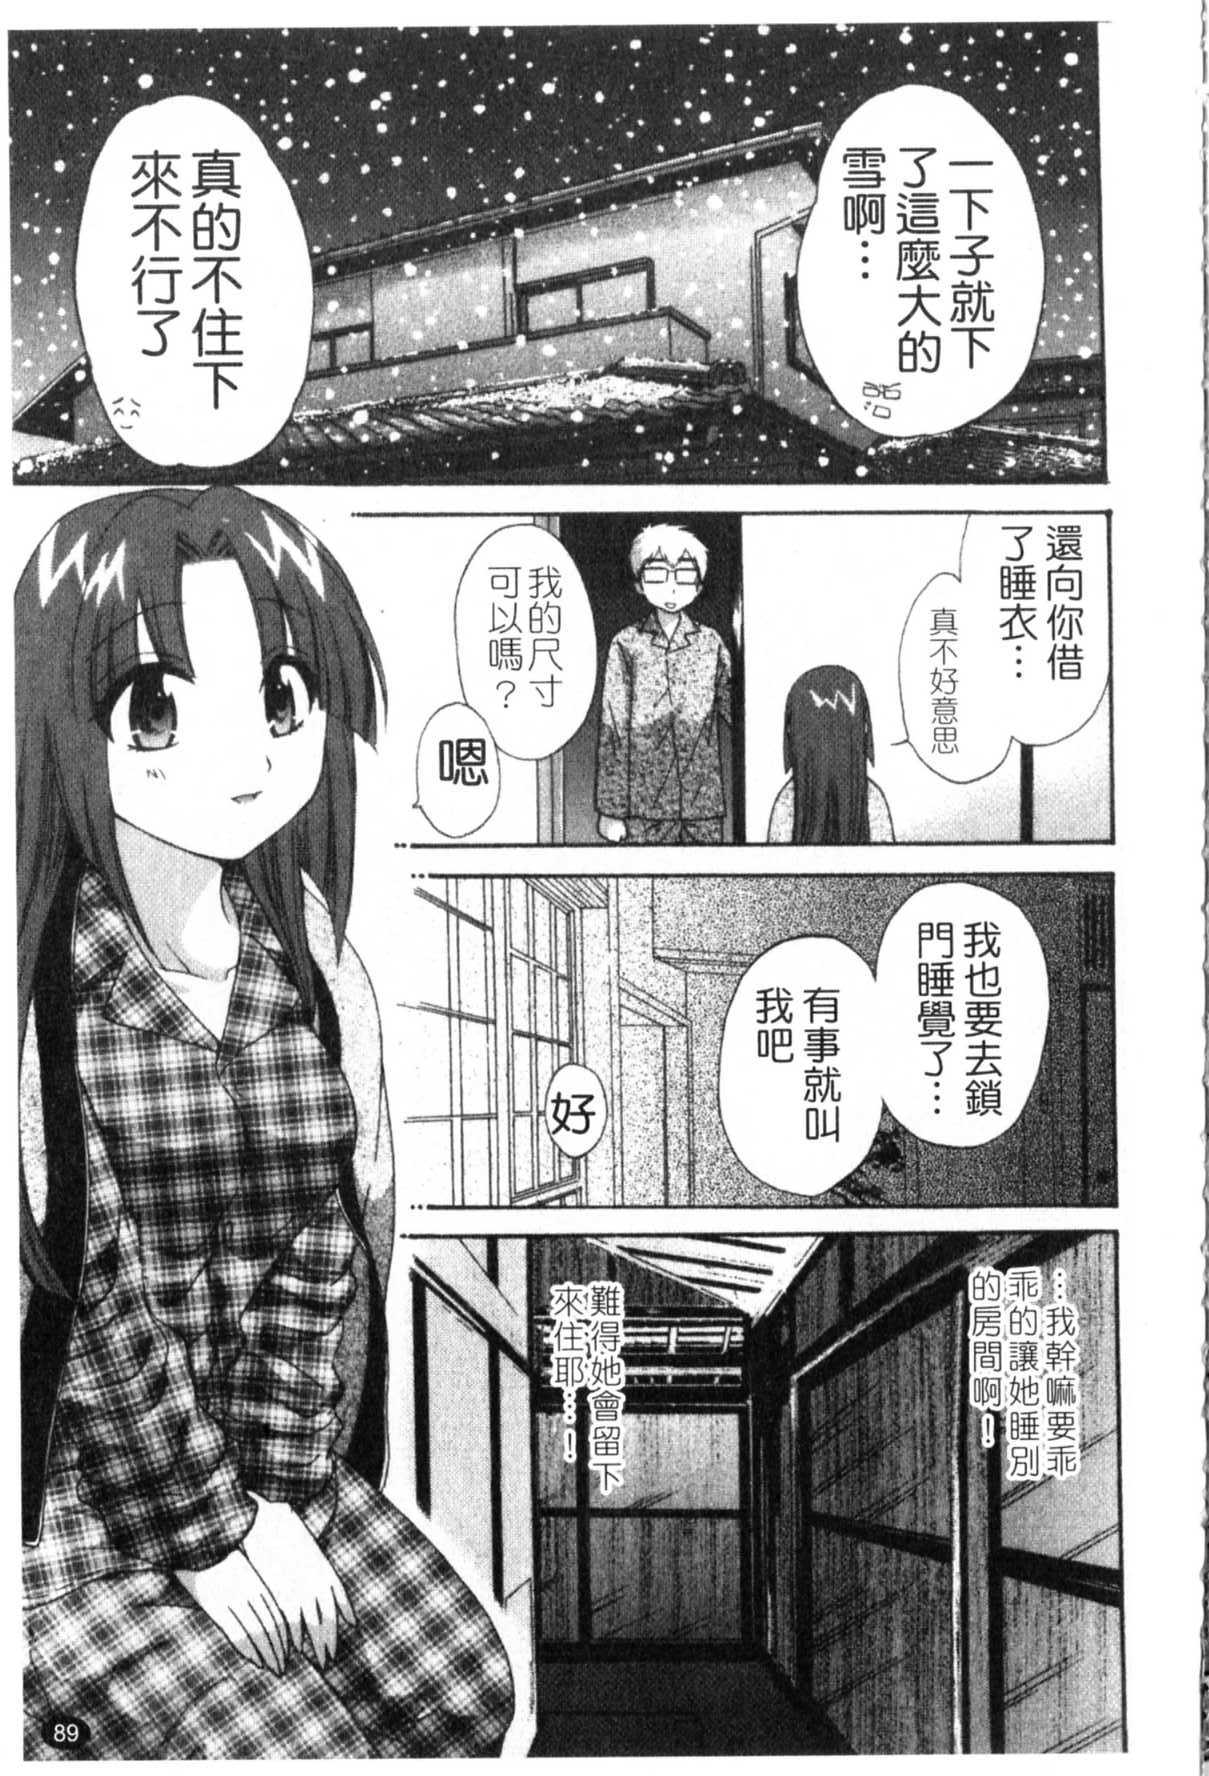 [Pon Takahanada] A Hundred of the Way of 100 Living with Her [CHINESE] [ポン貴花田] 家政婦(かのじょ)と暮らす100の方法 [中文]